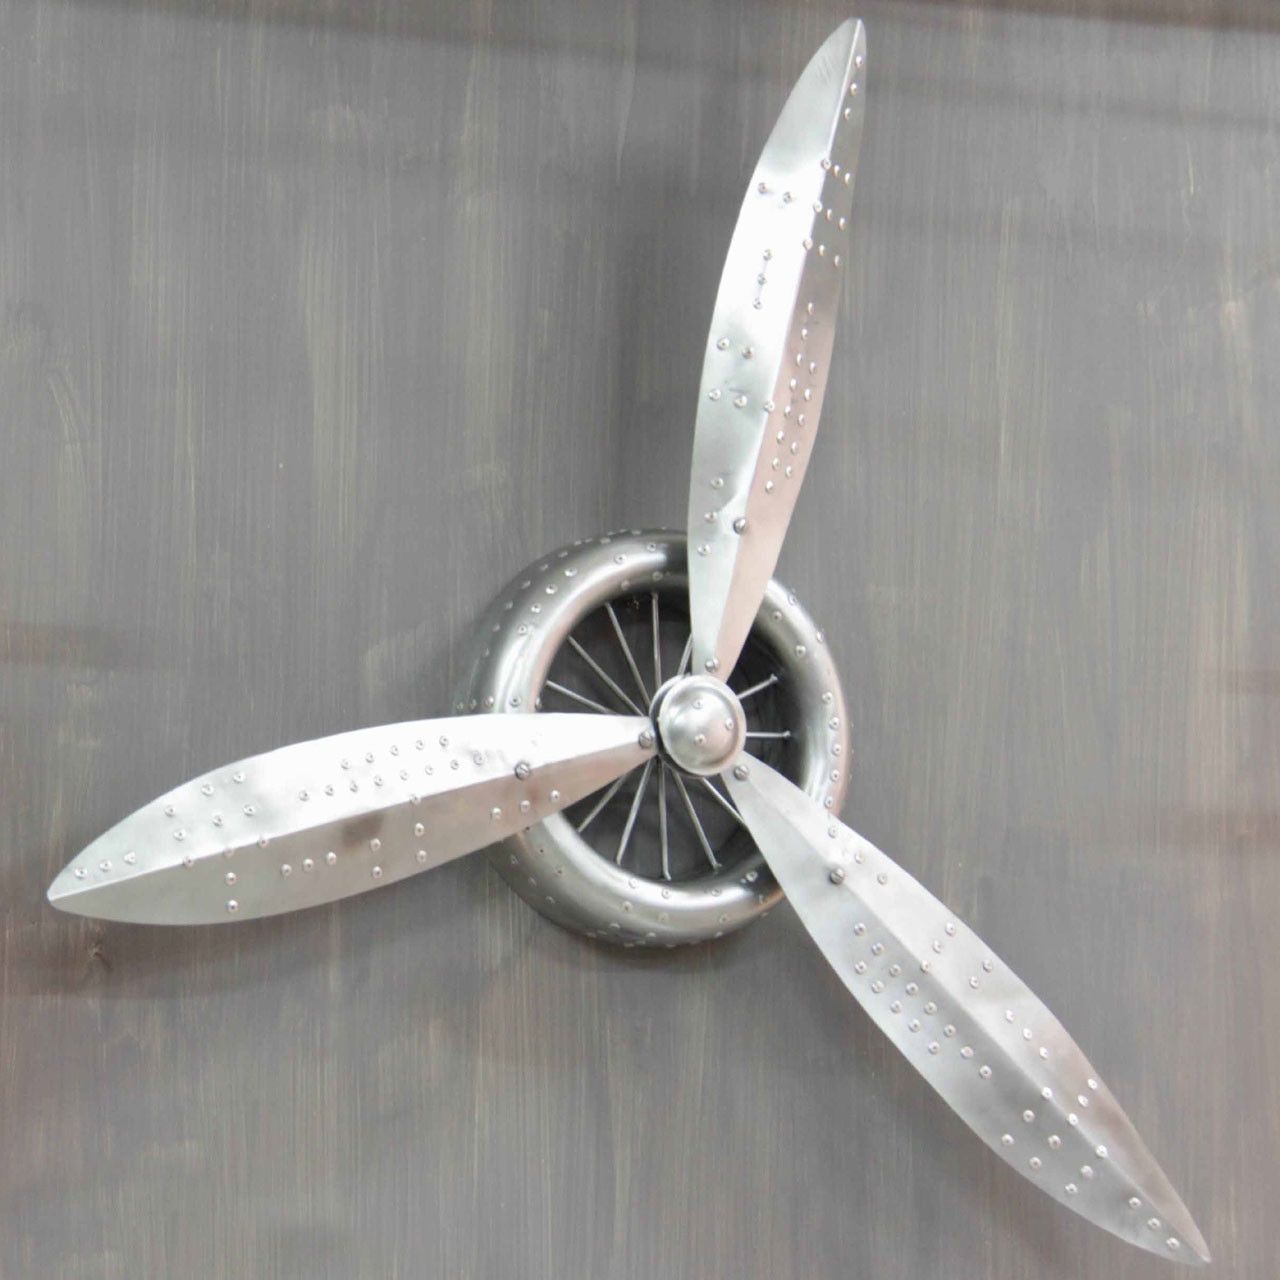 Wall Art Designs: Aviation Wall Art Vintage Aviation Propeller Throughout Most Recent Metal Airplane Wall Art (View 6 of 15)